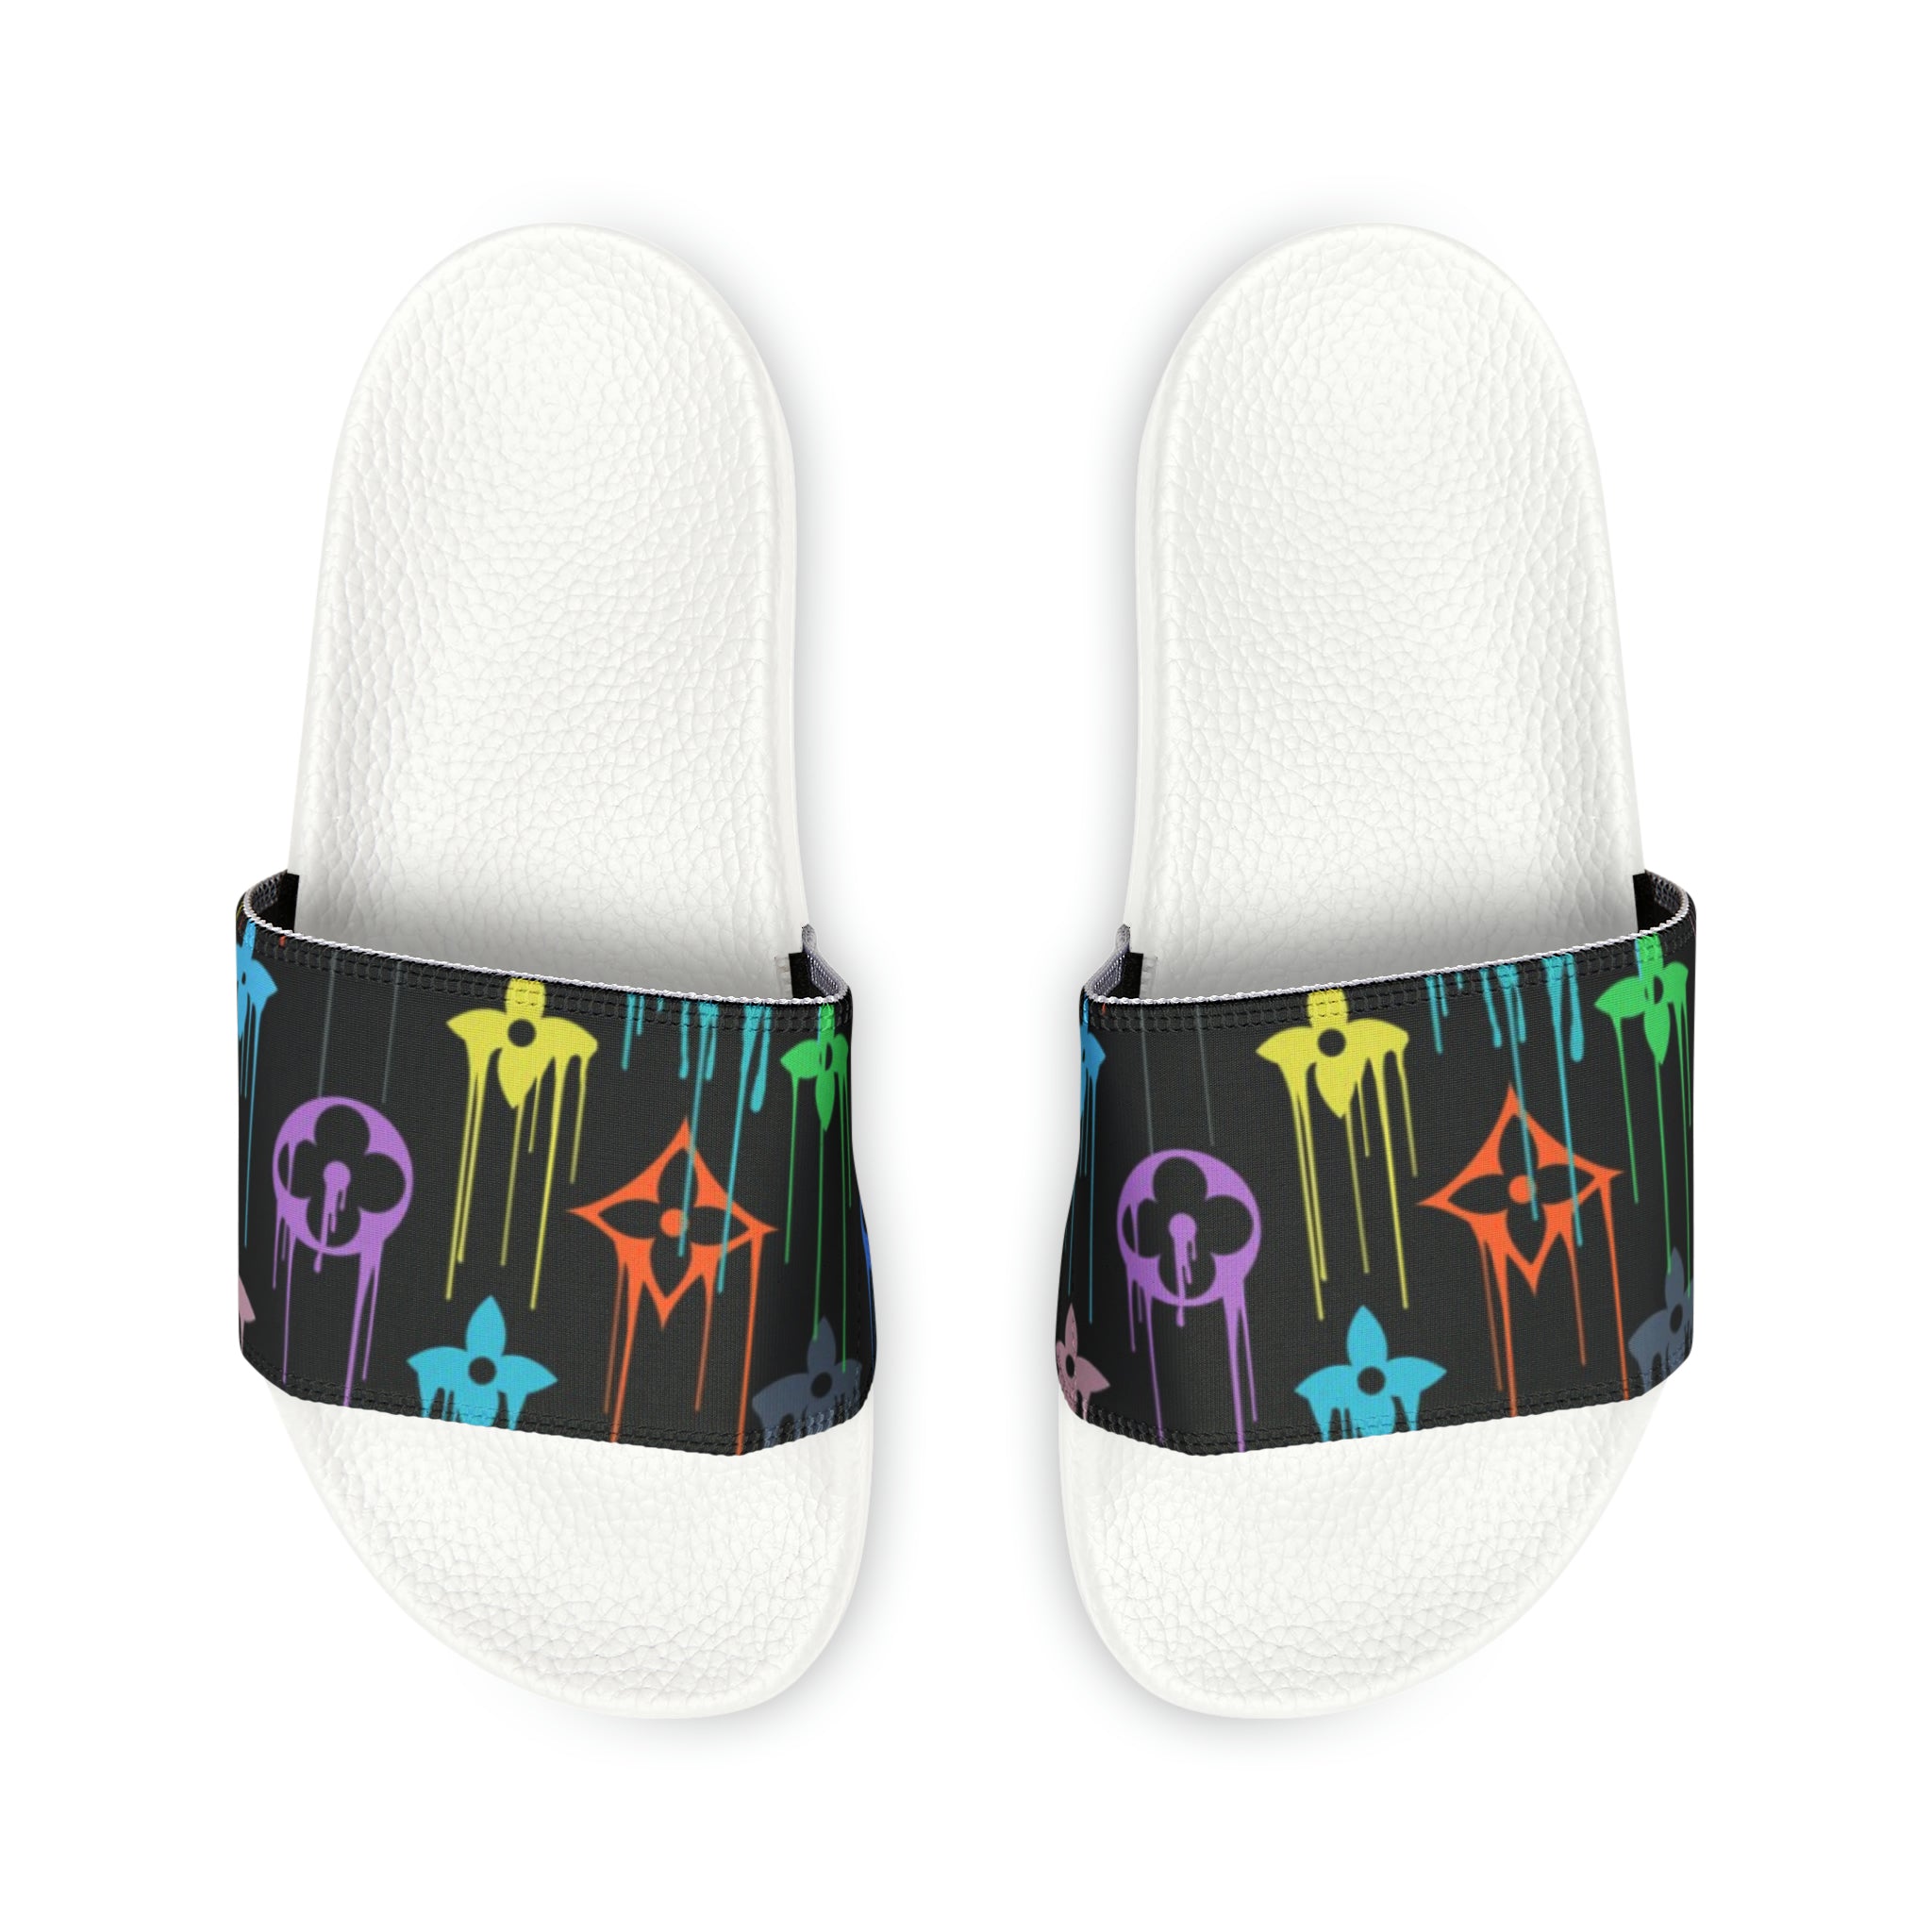 Children's Wear Collection in Multi-Colour Drip Icons Slide Sandals Youth PU Slide Sandals, Kids Sandals, Children Summer Slides Kids Sandals  The Middle Aged Groove